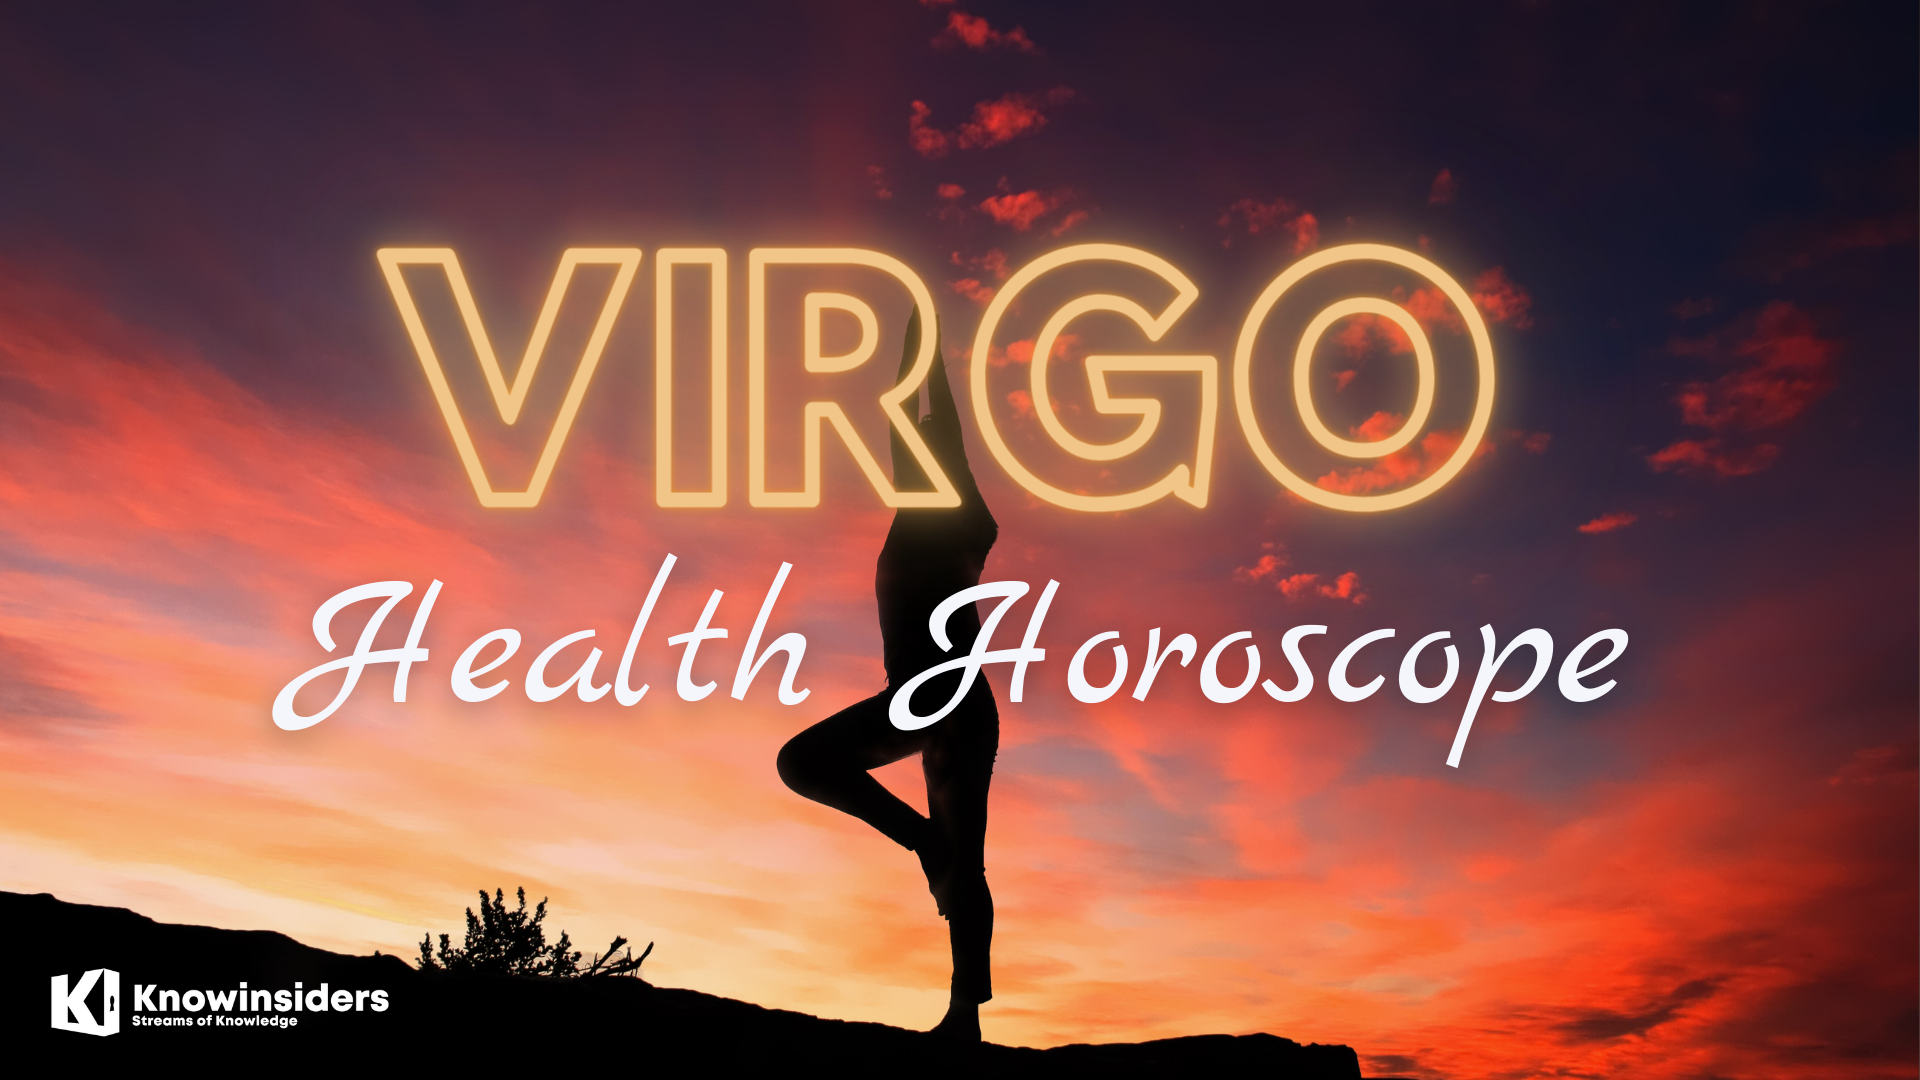 VIRGO Horoscope: Prediction for Beauty and Health Of All Life